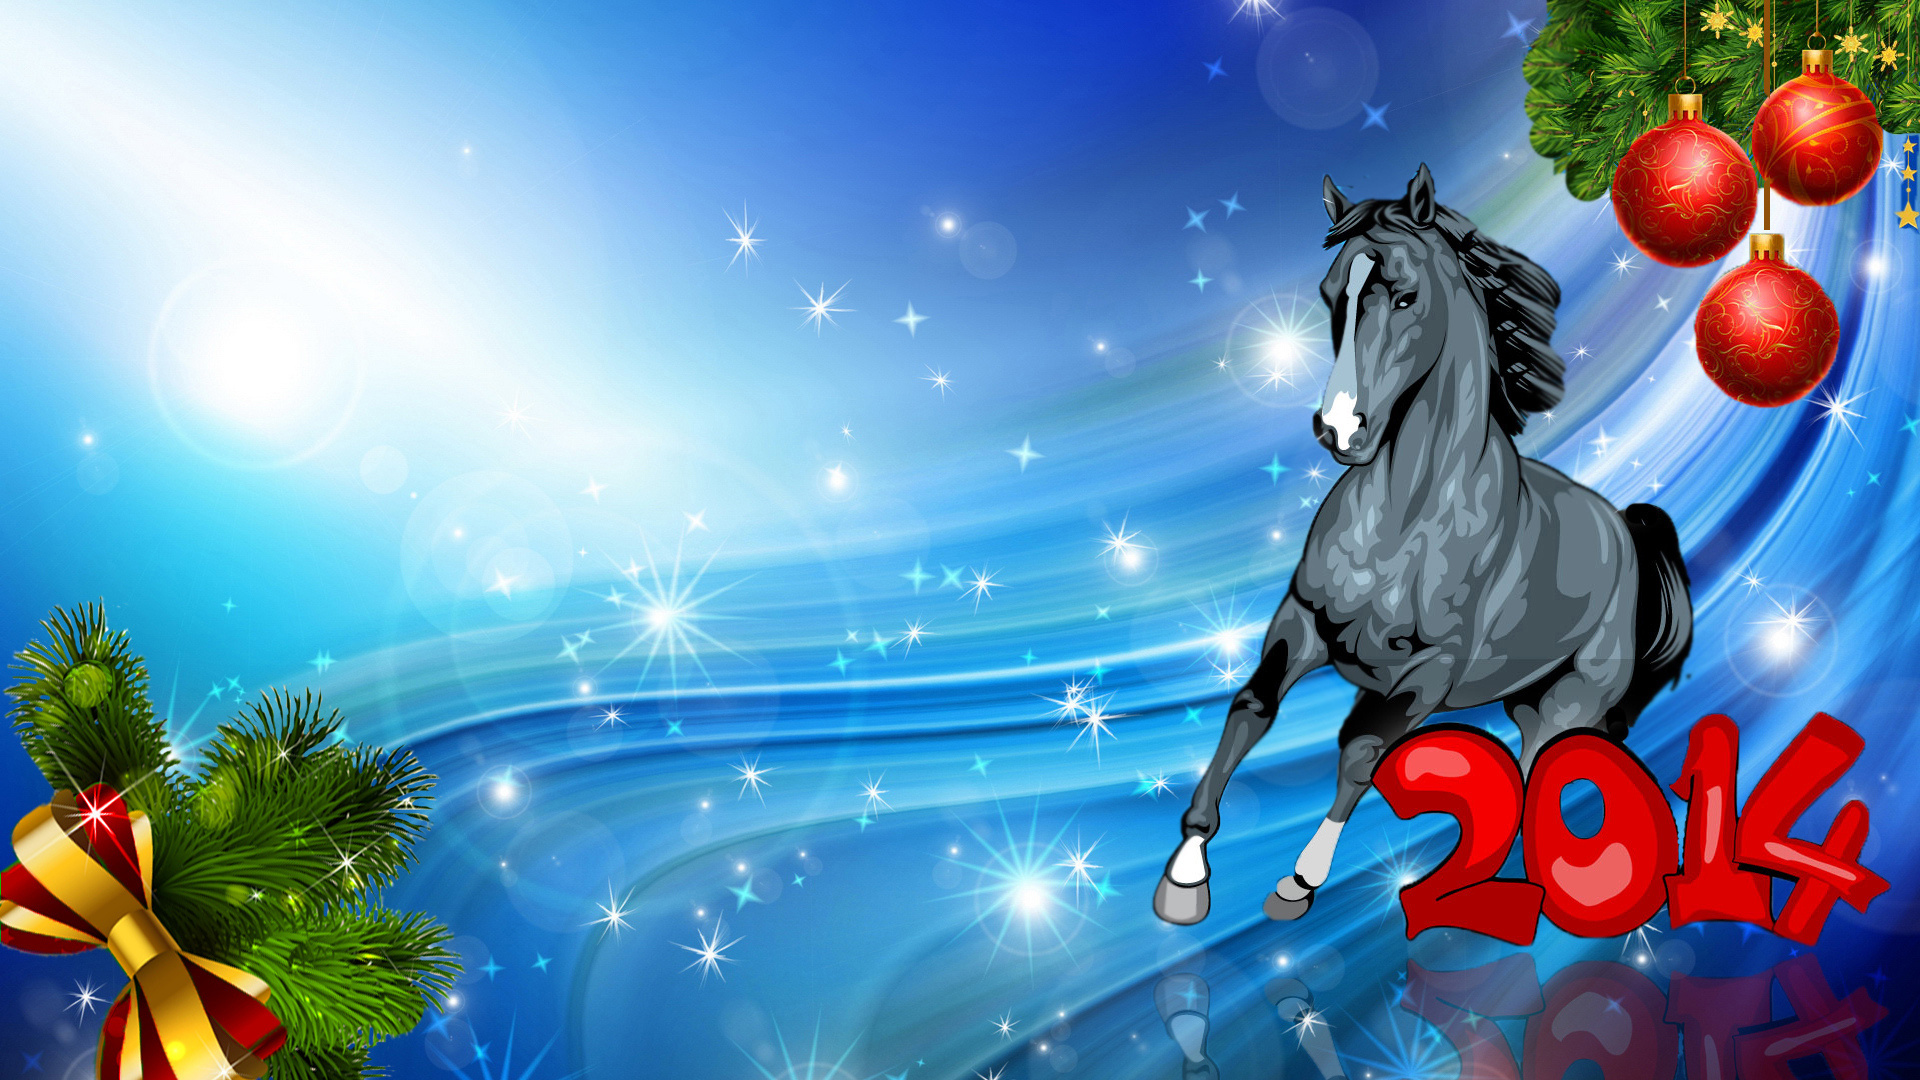 Wallpapers 2014 horse gray on the desktop